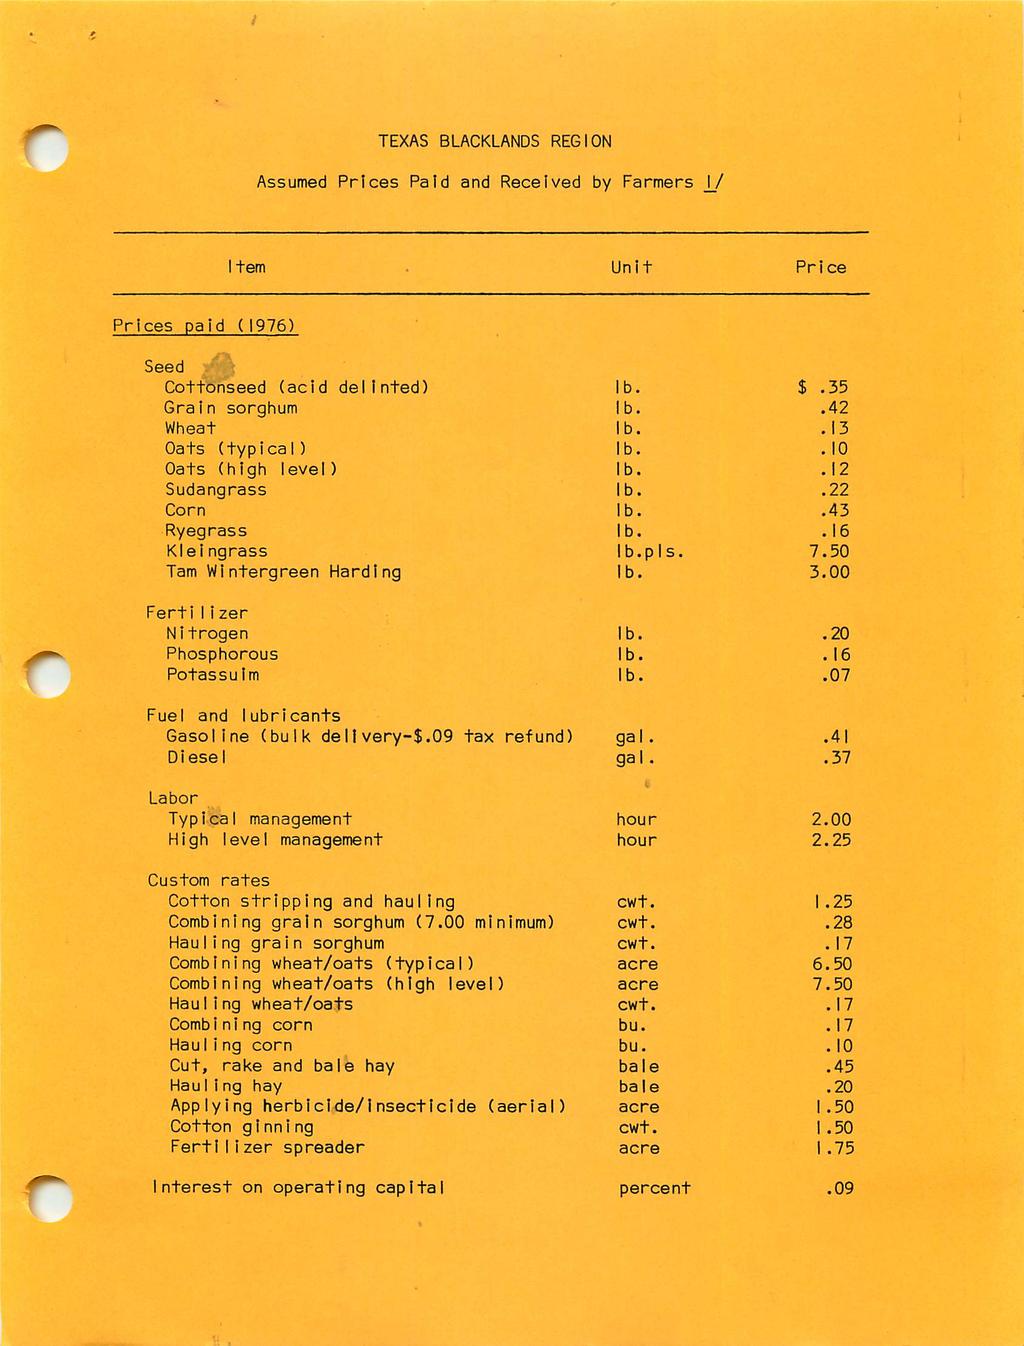 TEXAS BLACKLANDS REGION Assumed Prices Paid and Received by Farmers \J Item Unit Price Prices paid (1976) Seed Cottonseed (acid delinted) Grain sorghum Wheat O a t s ( t y p i c a l ) O a t s ( h i g